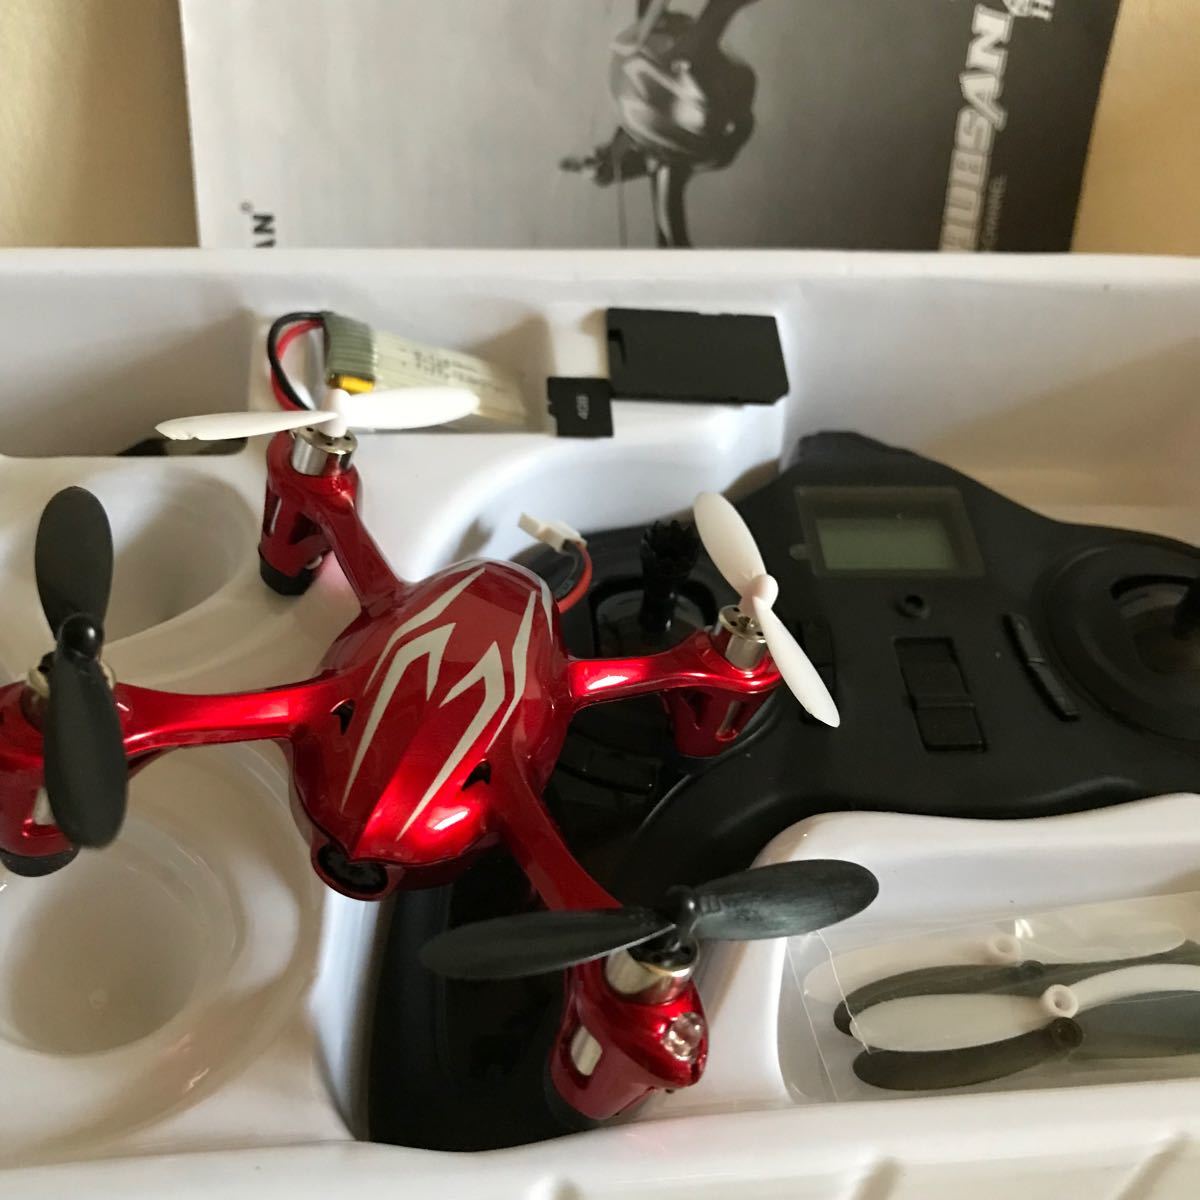 G FORCE.THE HUBSAN X4.H107C.ドローン.ハブサン.2.4GHZ.4CHANNEL RC SERIES 